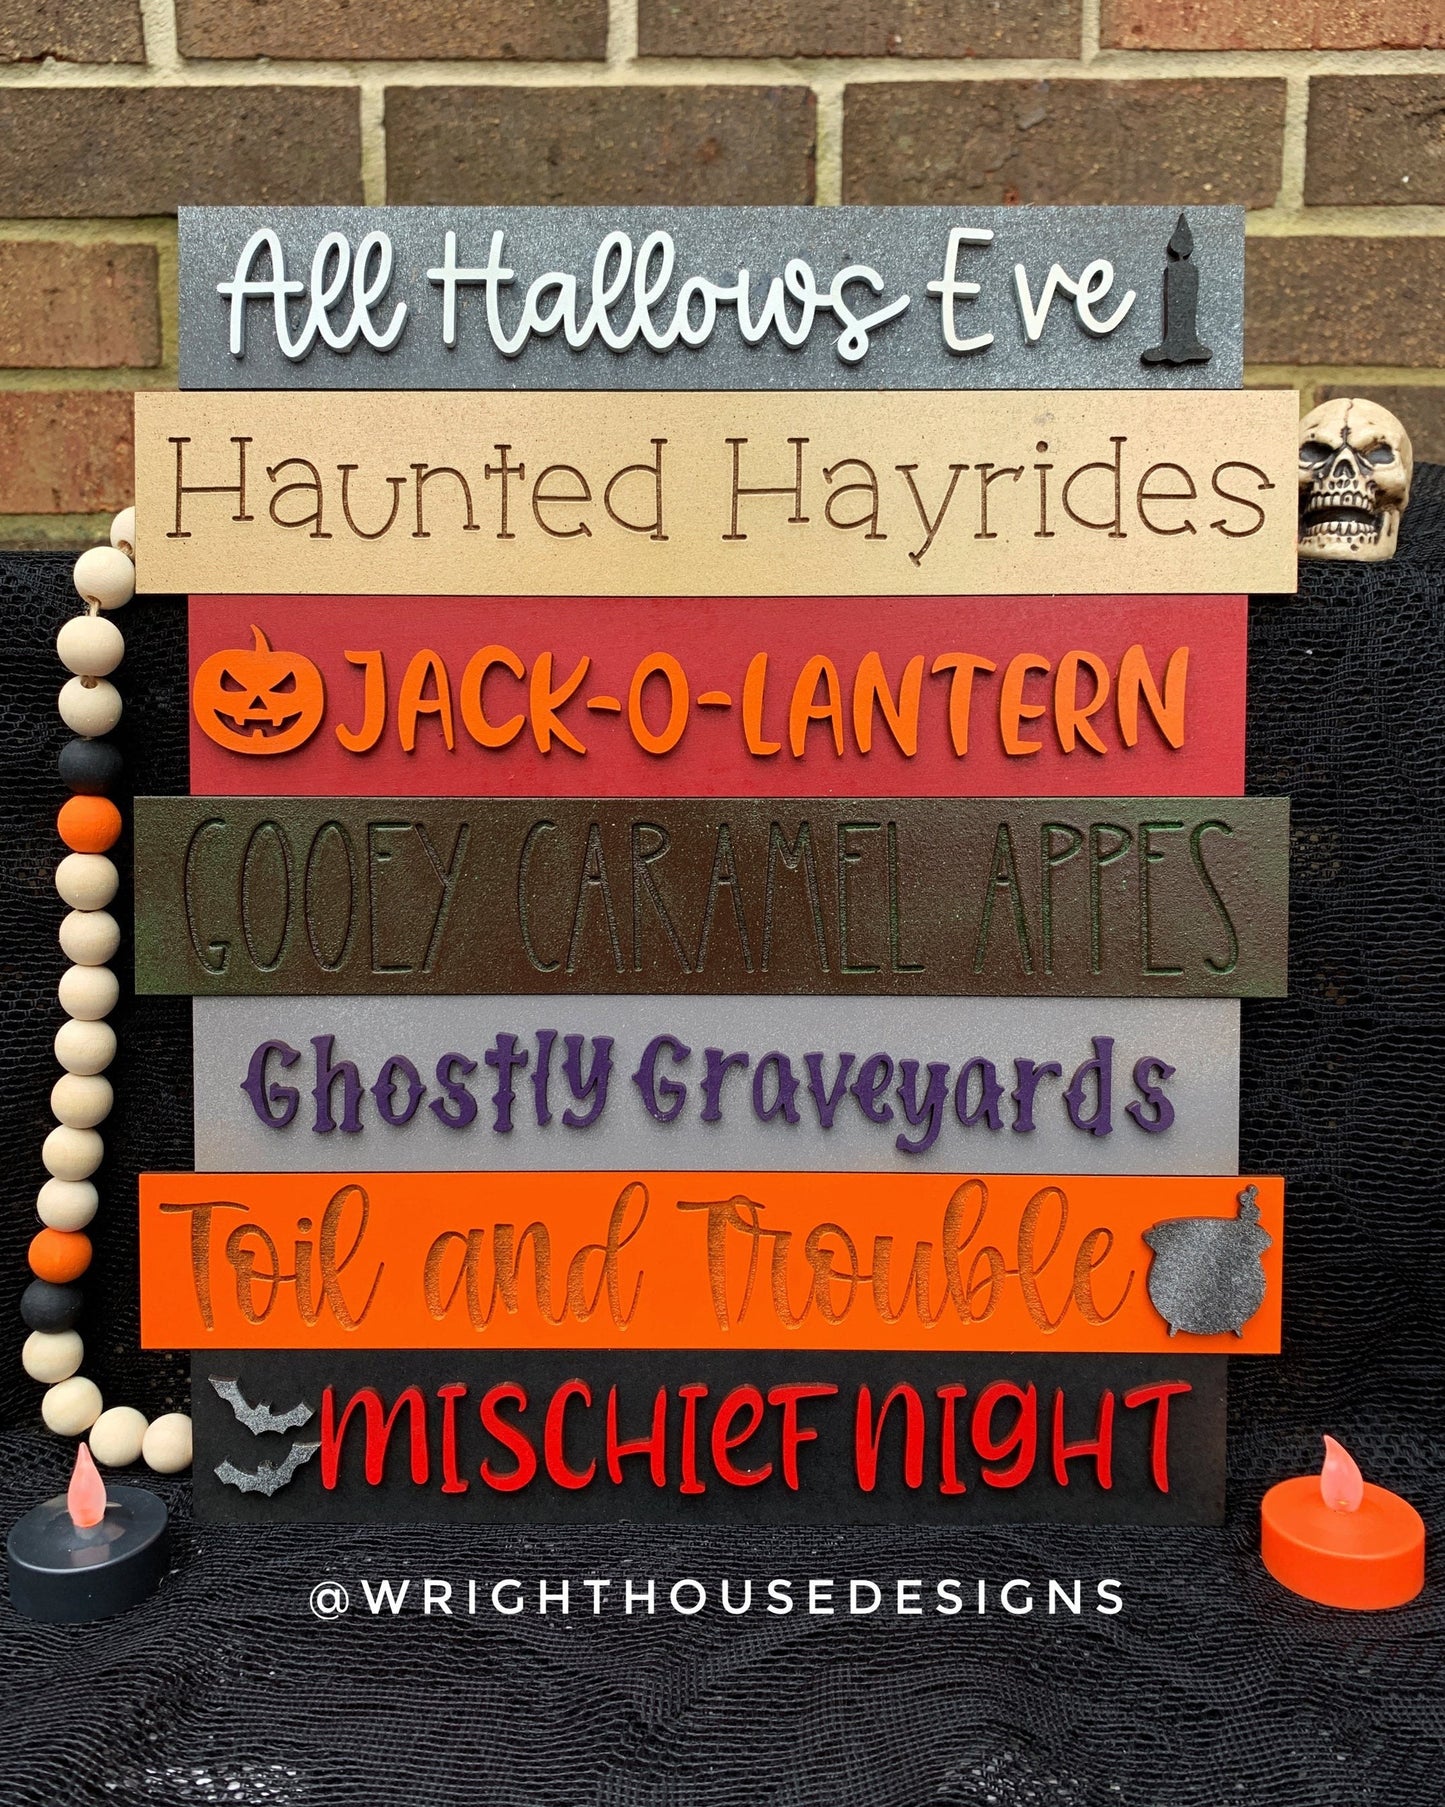 DIGITAL FILE - All Hallows Eve - Halloween Bucket List Stacked Sign - Seasonal Fall Decorations - SVG For Glowforge